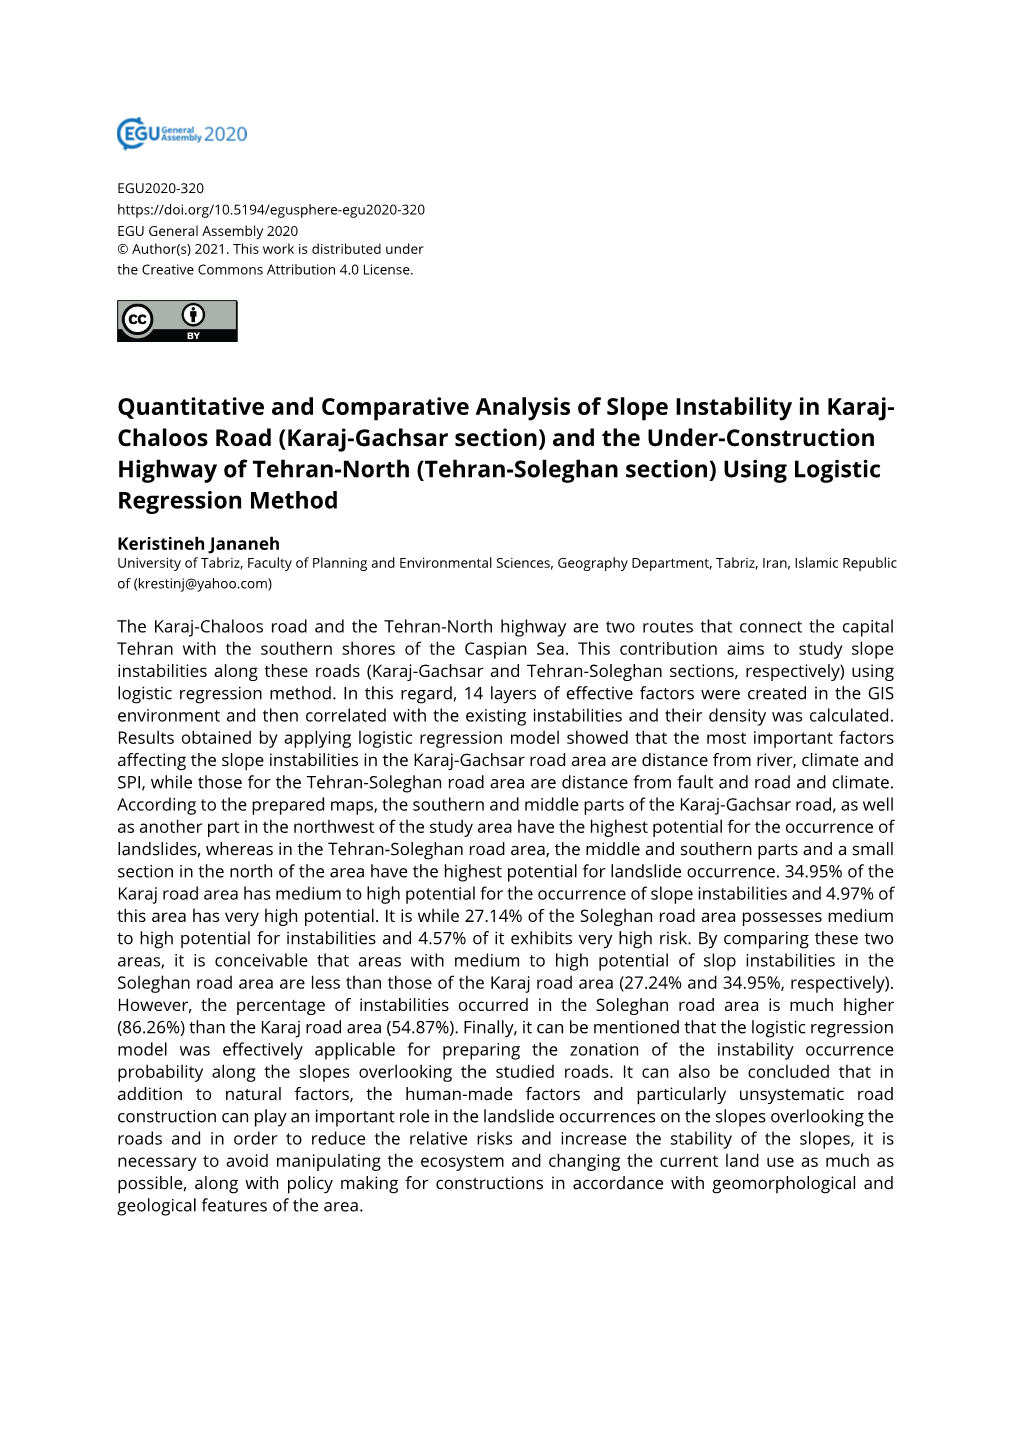 Quantitative and Comparative Analysis of Slope Instability in Karaj